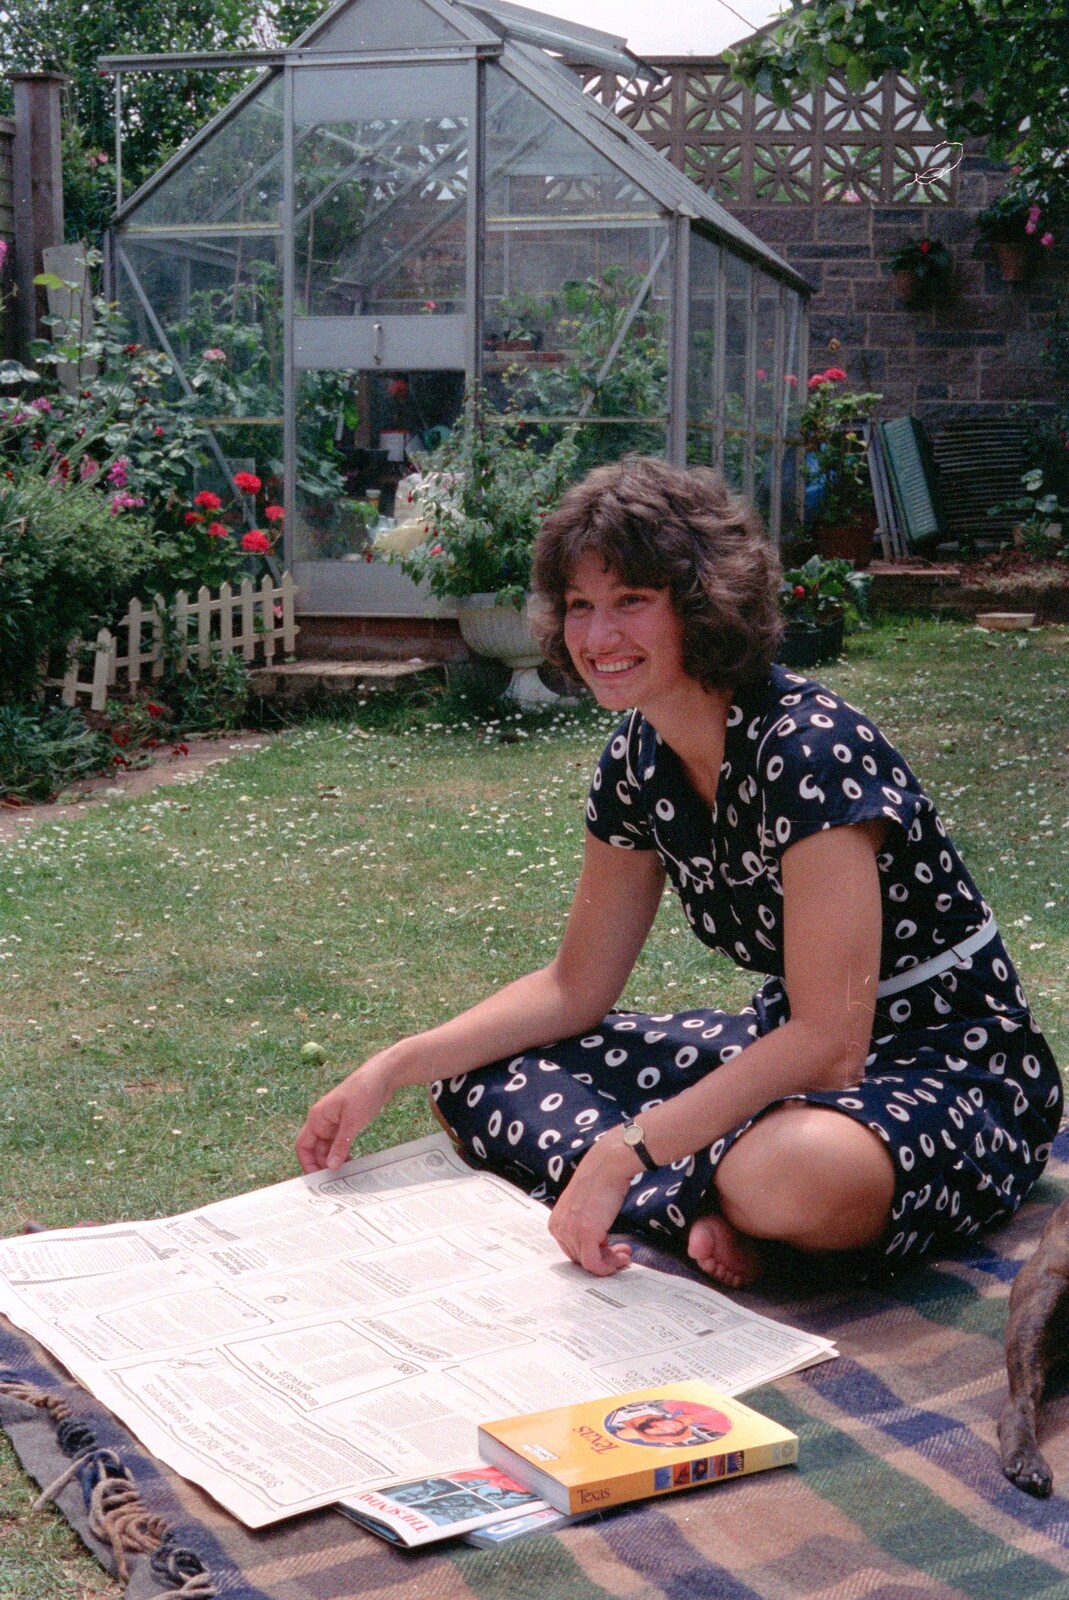 Angela looks for jobs in the paper from Uni: A Trip to the Riviera and Oberon Gets New Shoes, Torquay and Harbertonford, Devon - 3rd July 1989